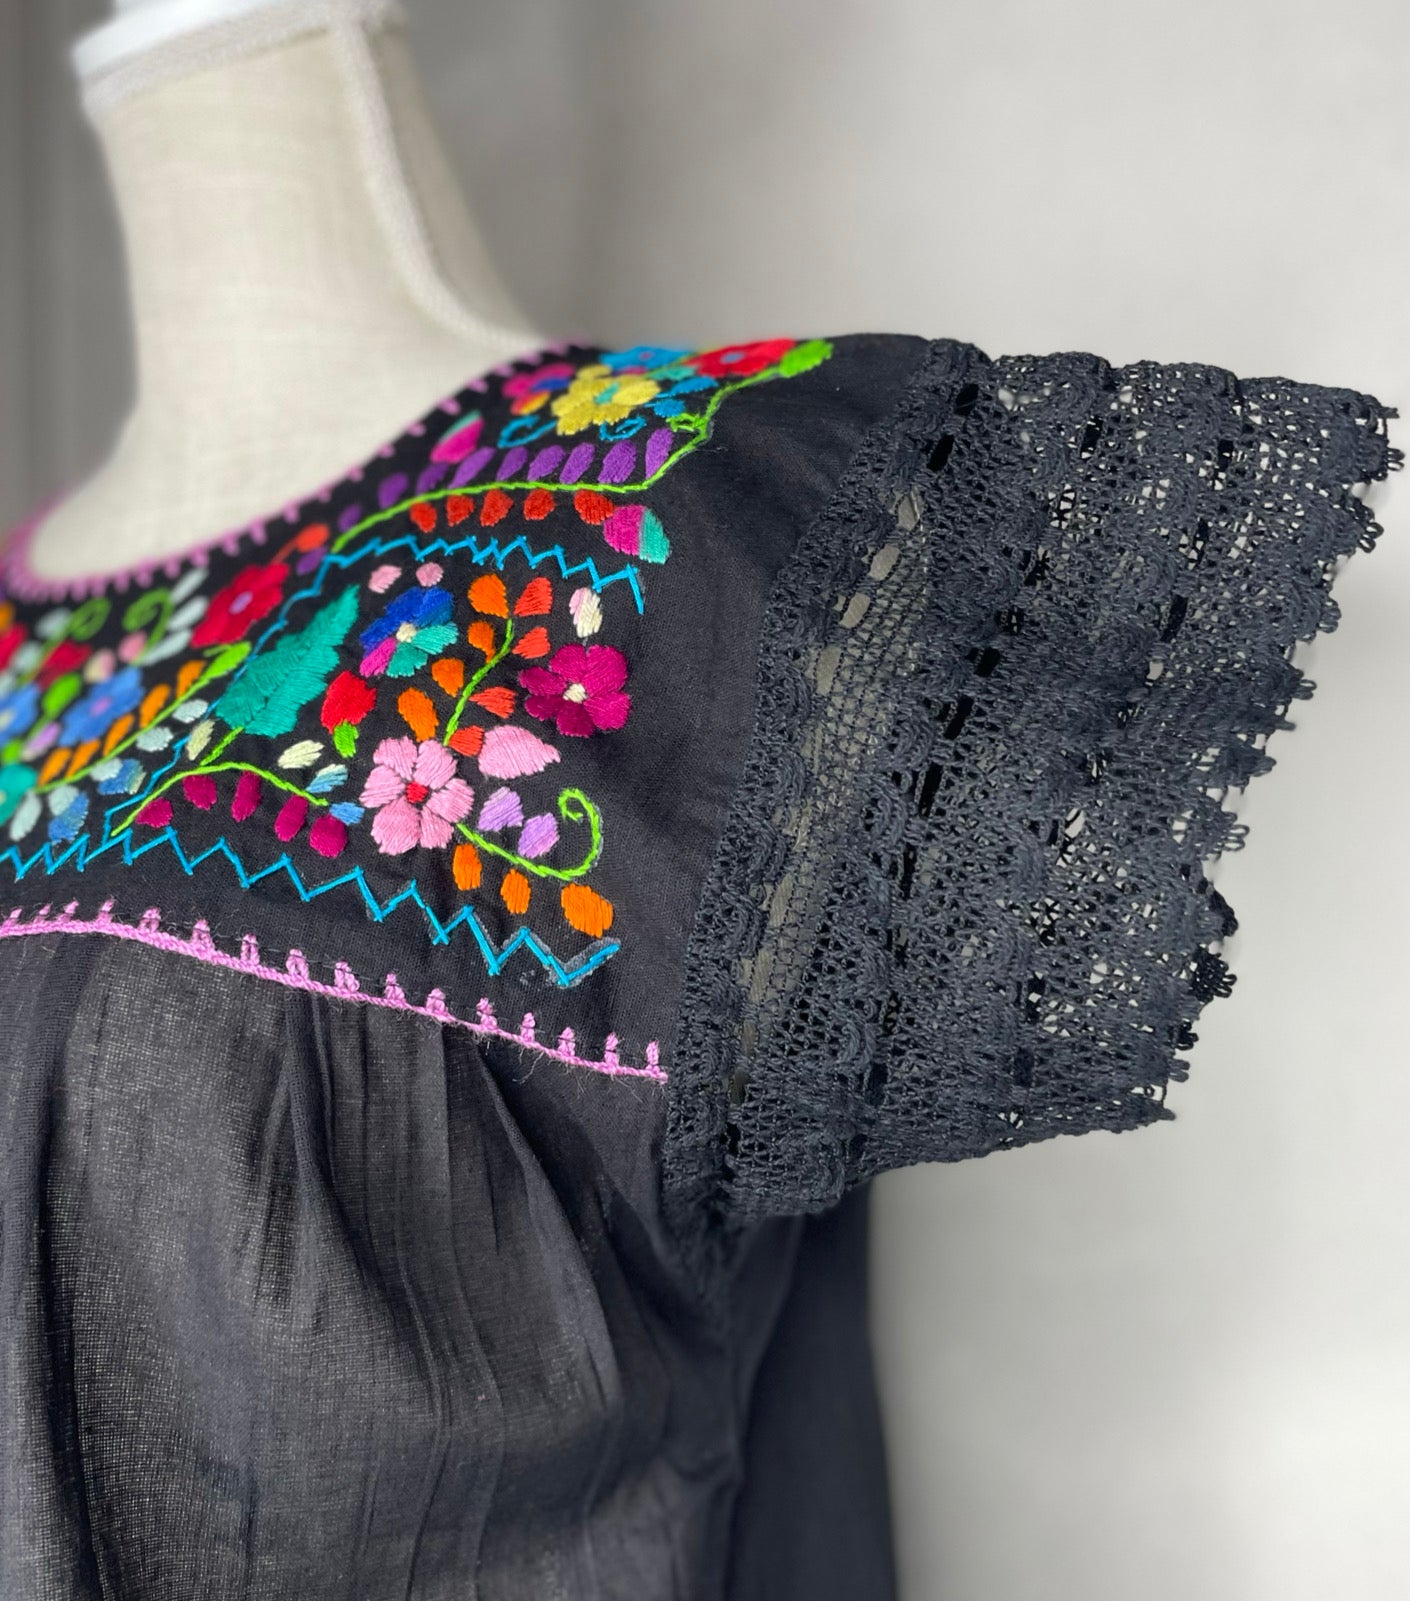 Boho Peasant Mexican Blouse - Laced Sleeve